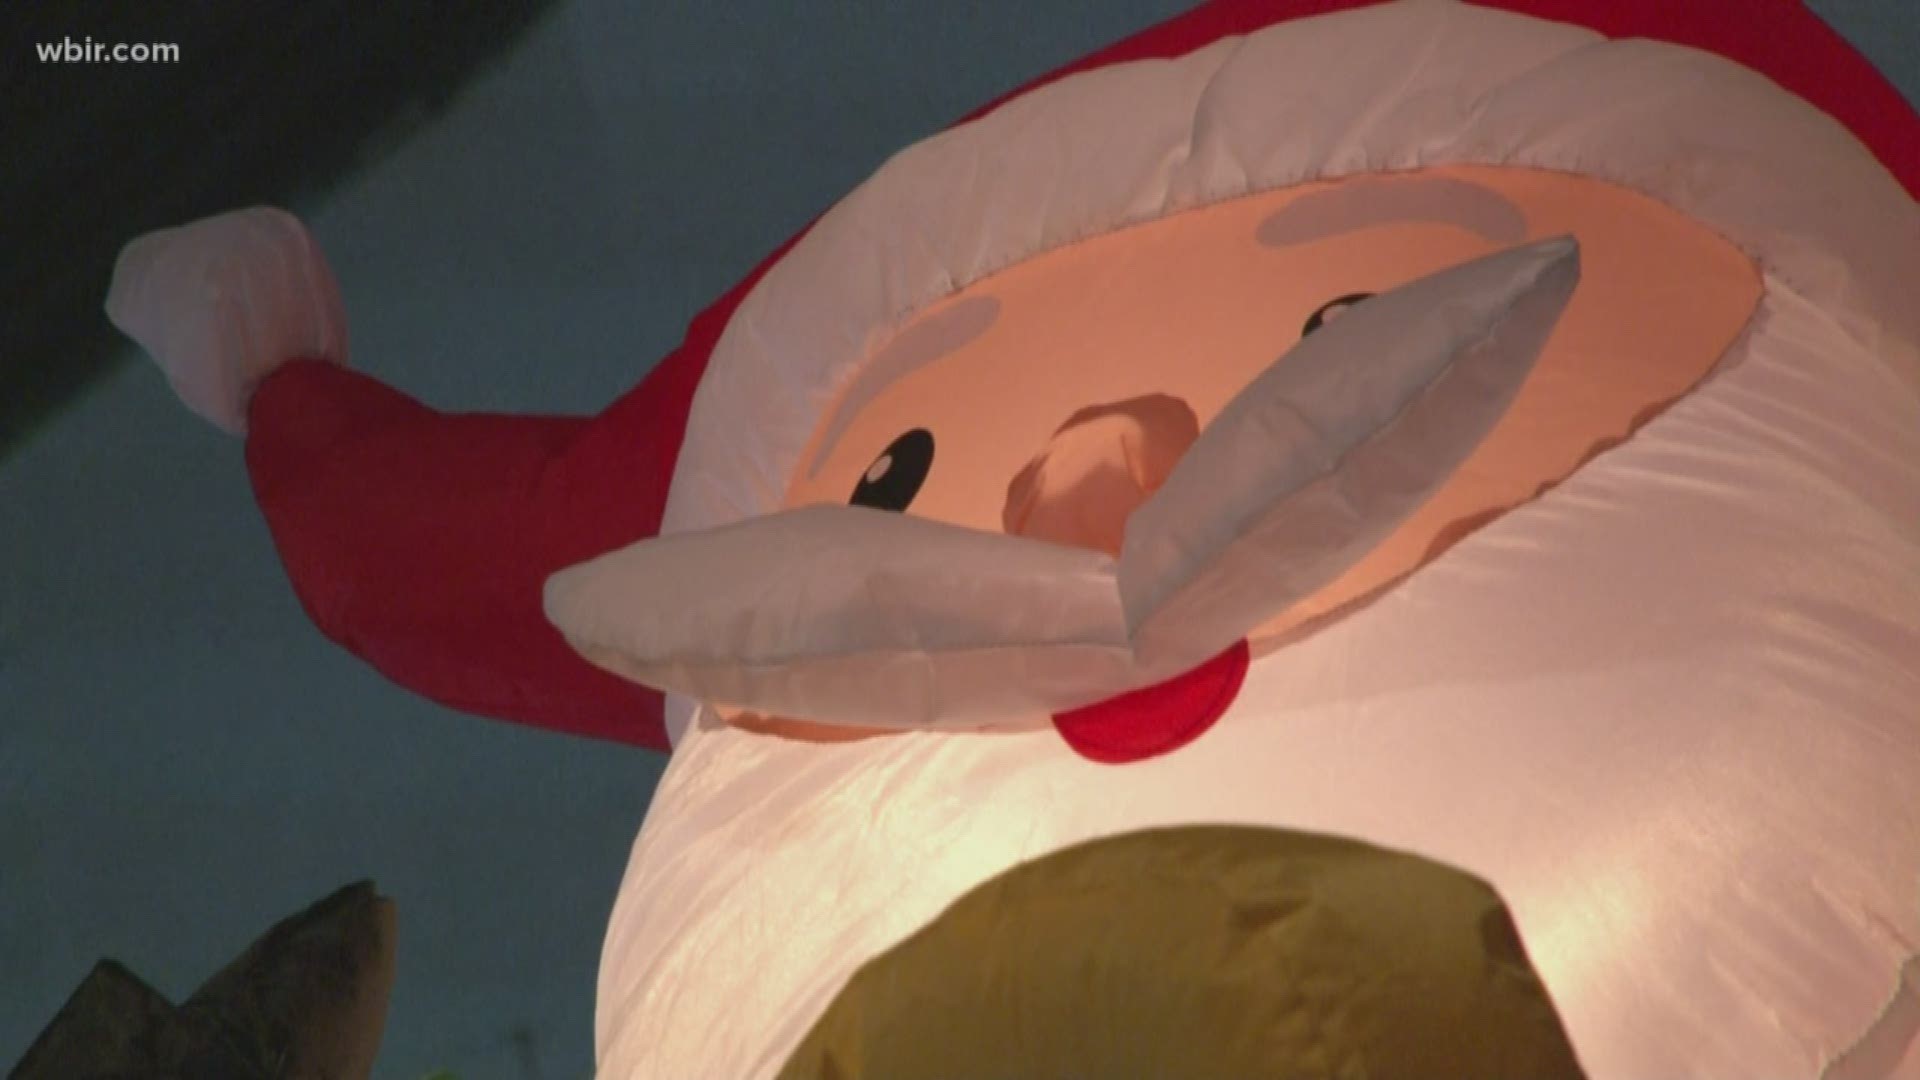 There are several holiday festivities throughout Knoxville anyone can participate in for a little holiday cheer.